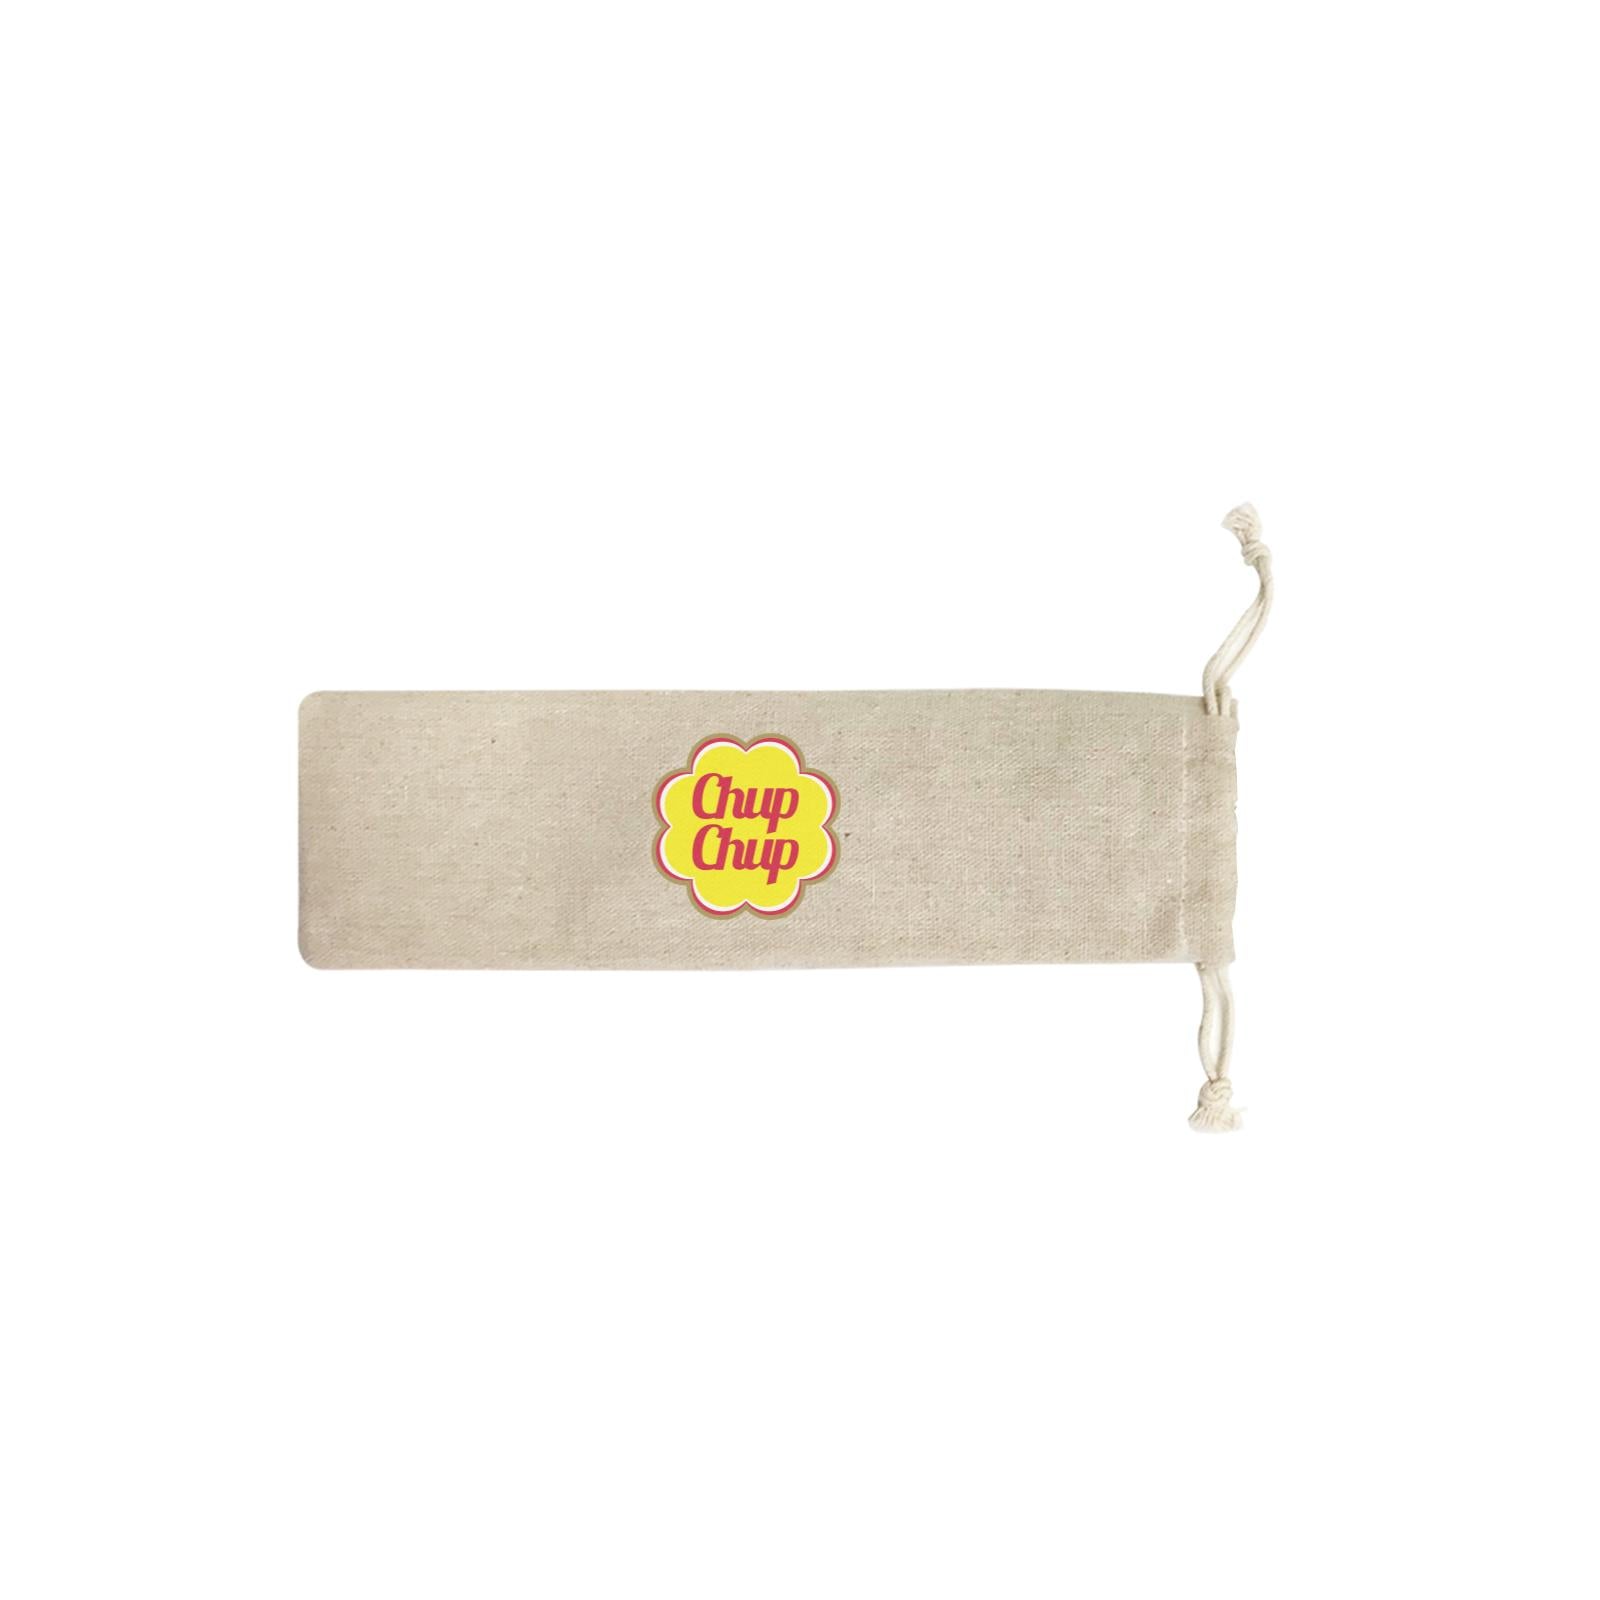 Slang Statement Chup Chup SB Straw Pouch (No Straws included)